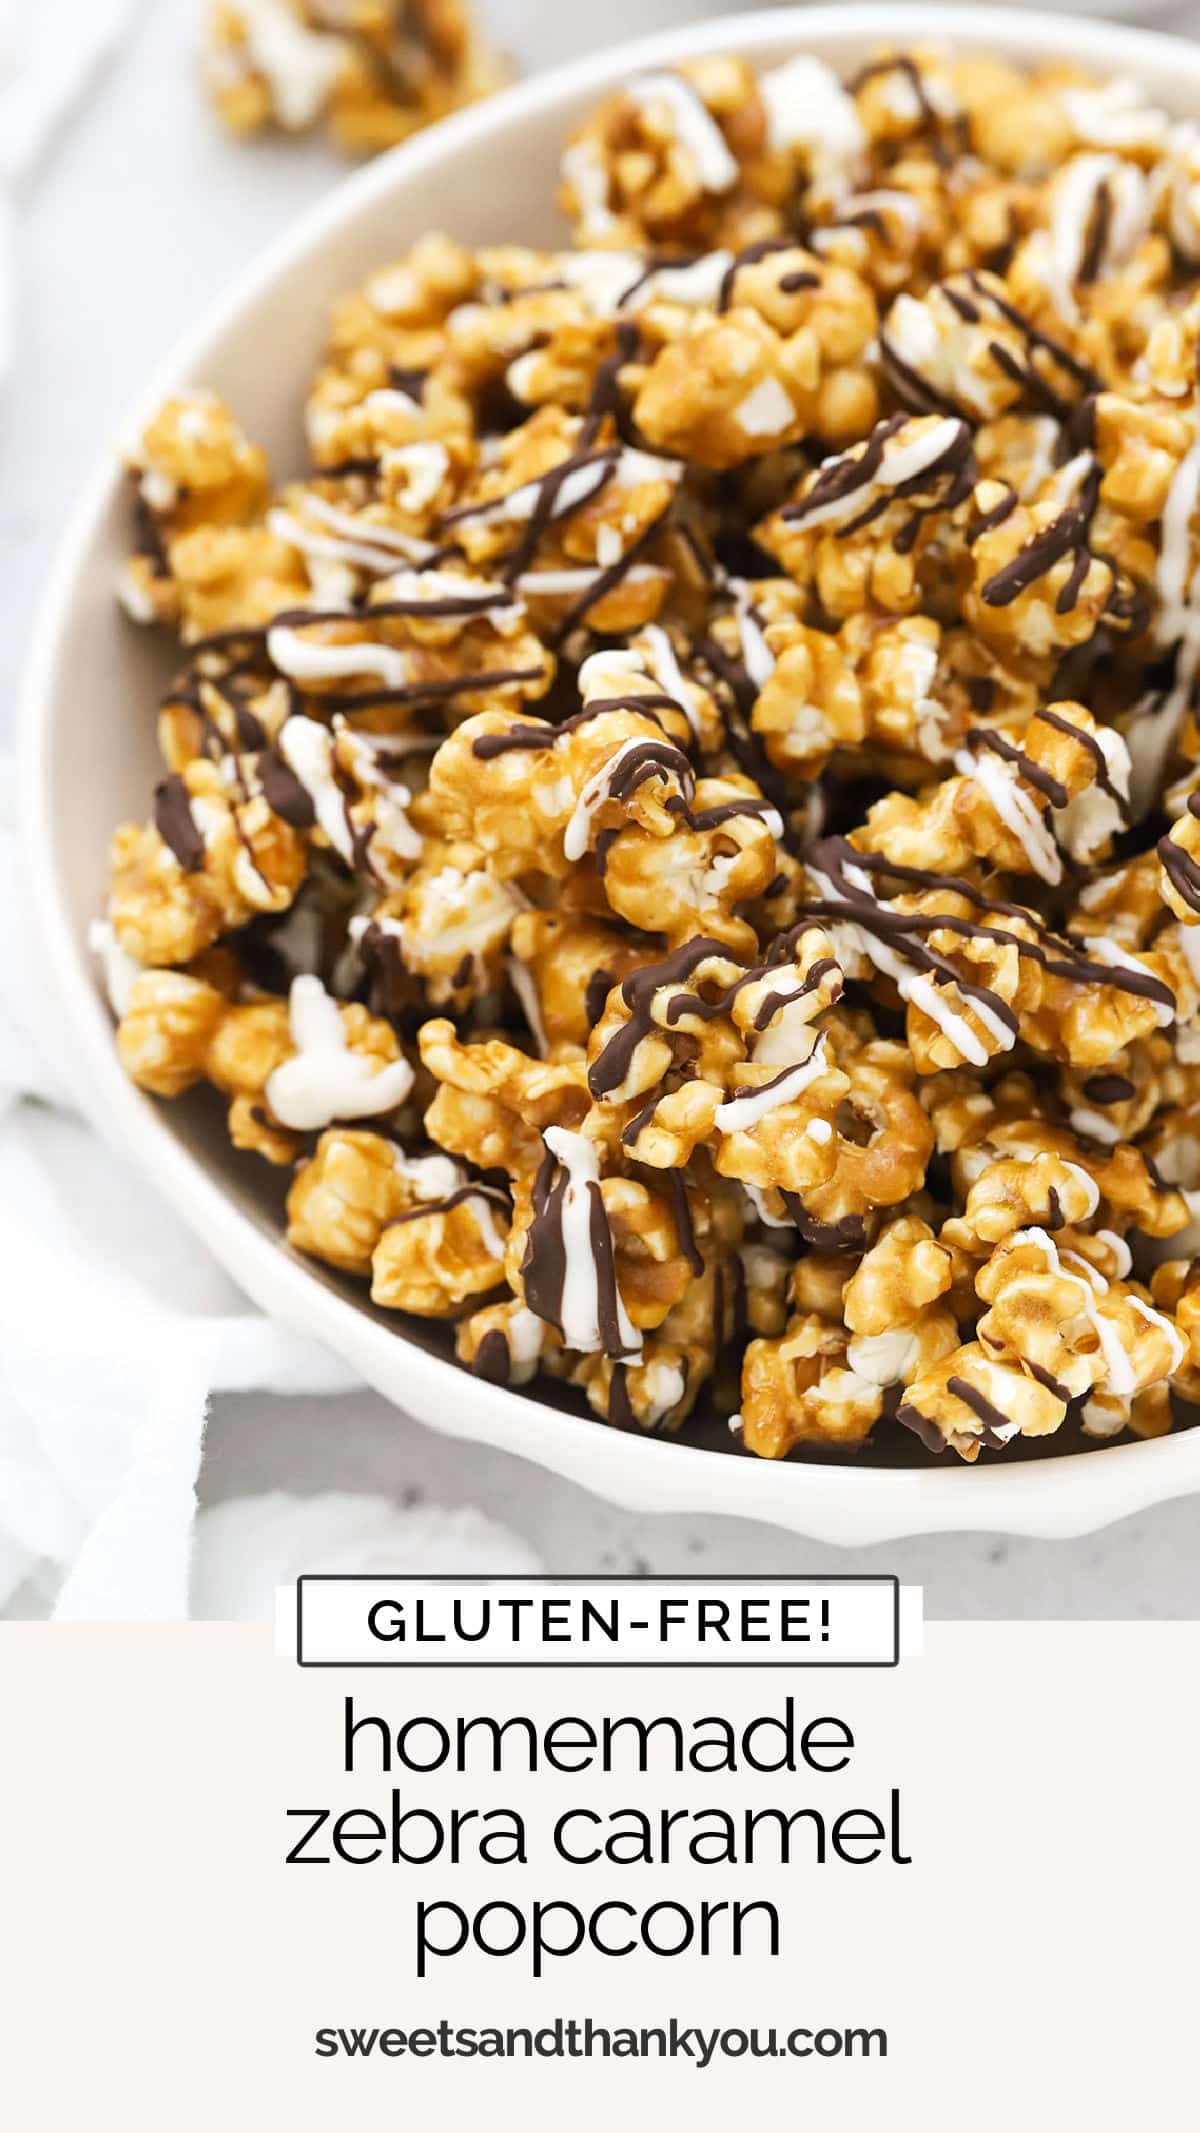 Learn how to make homemade zebra popcorn with our easy recipe! This chocolate drizzled caramel corn is always a hit! (Gluten-Free!) / zebra caramel popcorn / caramel corn drizzled with chocolate / chocolate drizzled caramel corn / chocolate drizzled caramel popcorn / zebra corn recipe / is zebra popcorn gluten-free / gluten free popcorn recipe / gluten free holiday treat